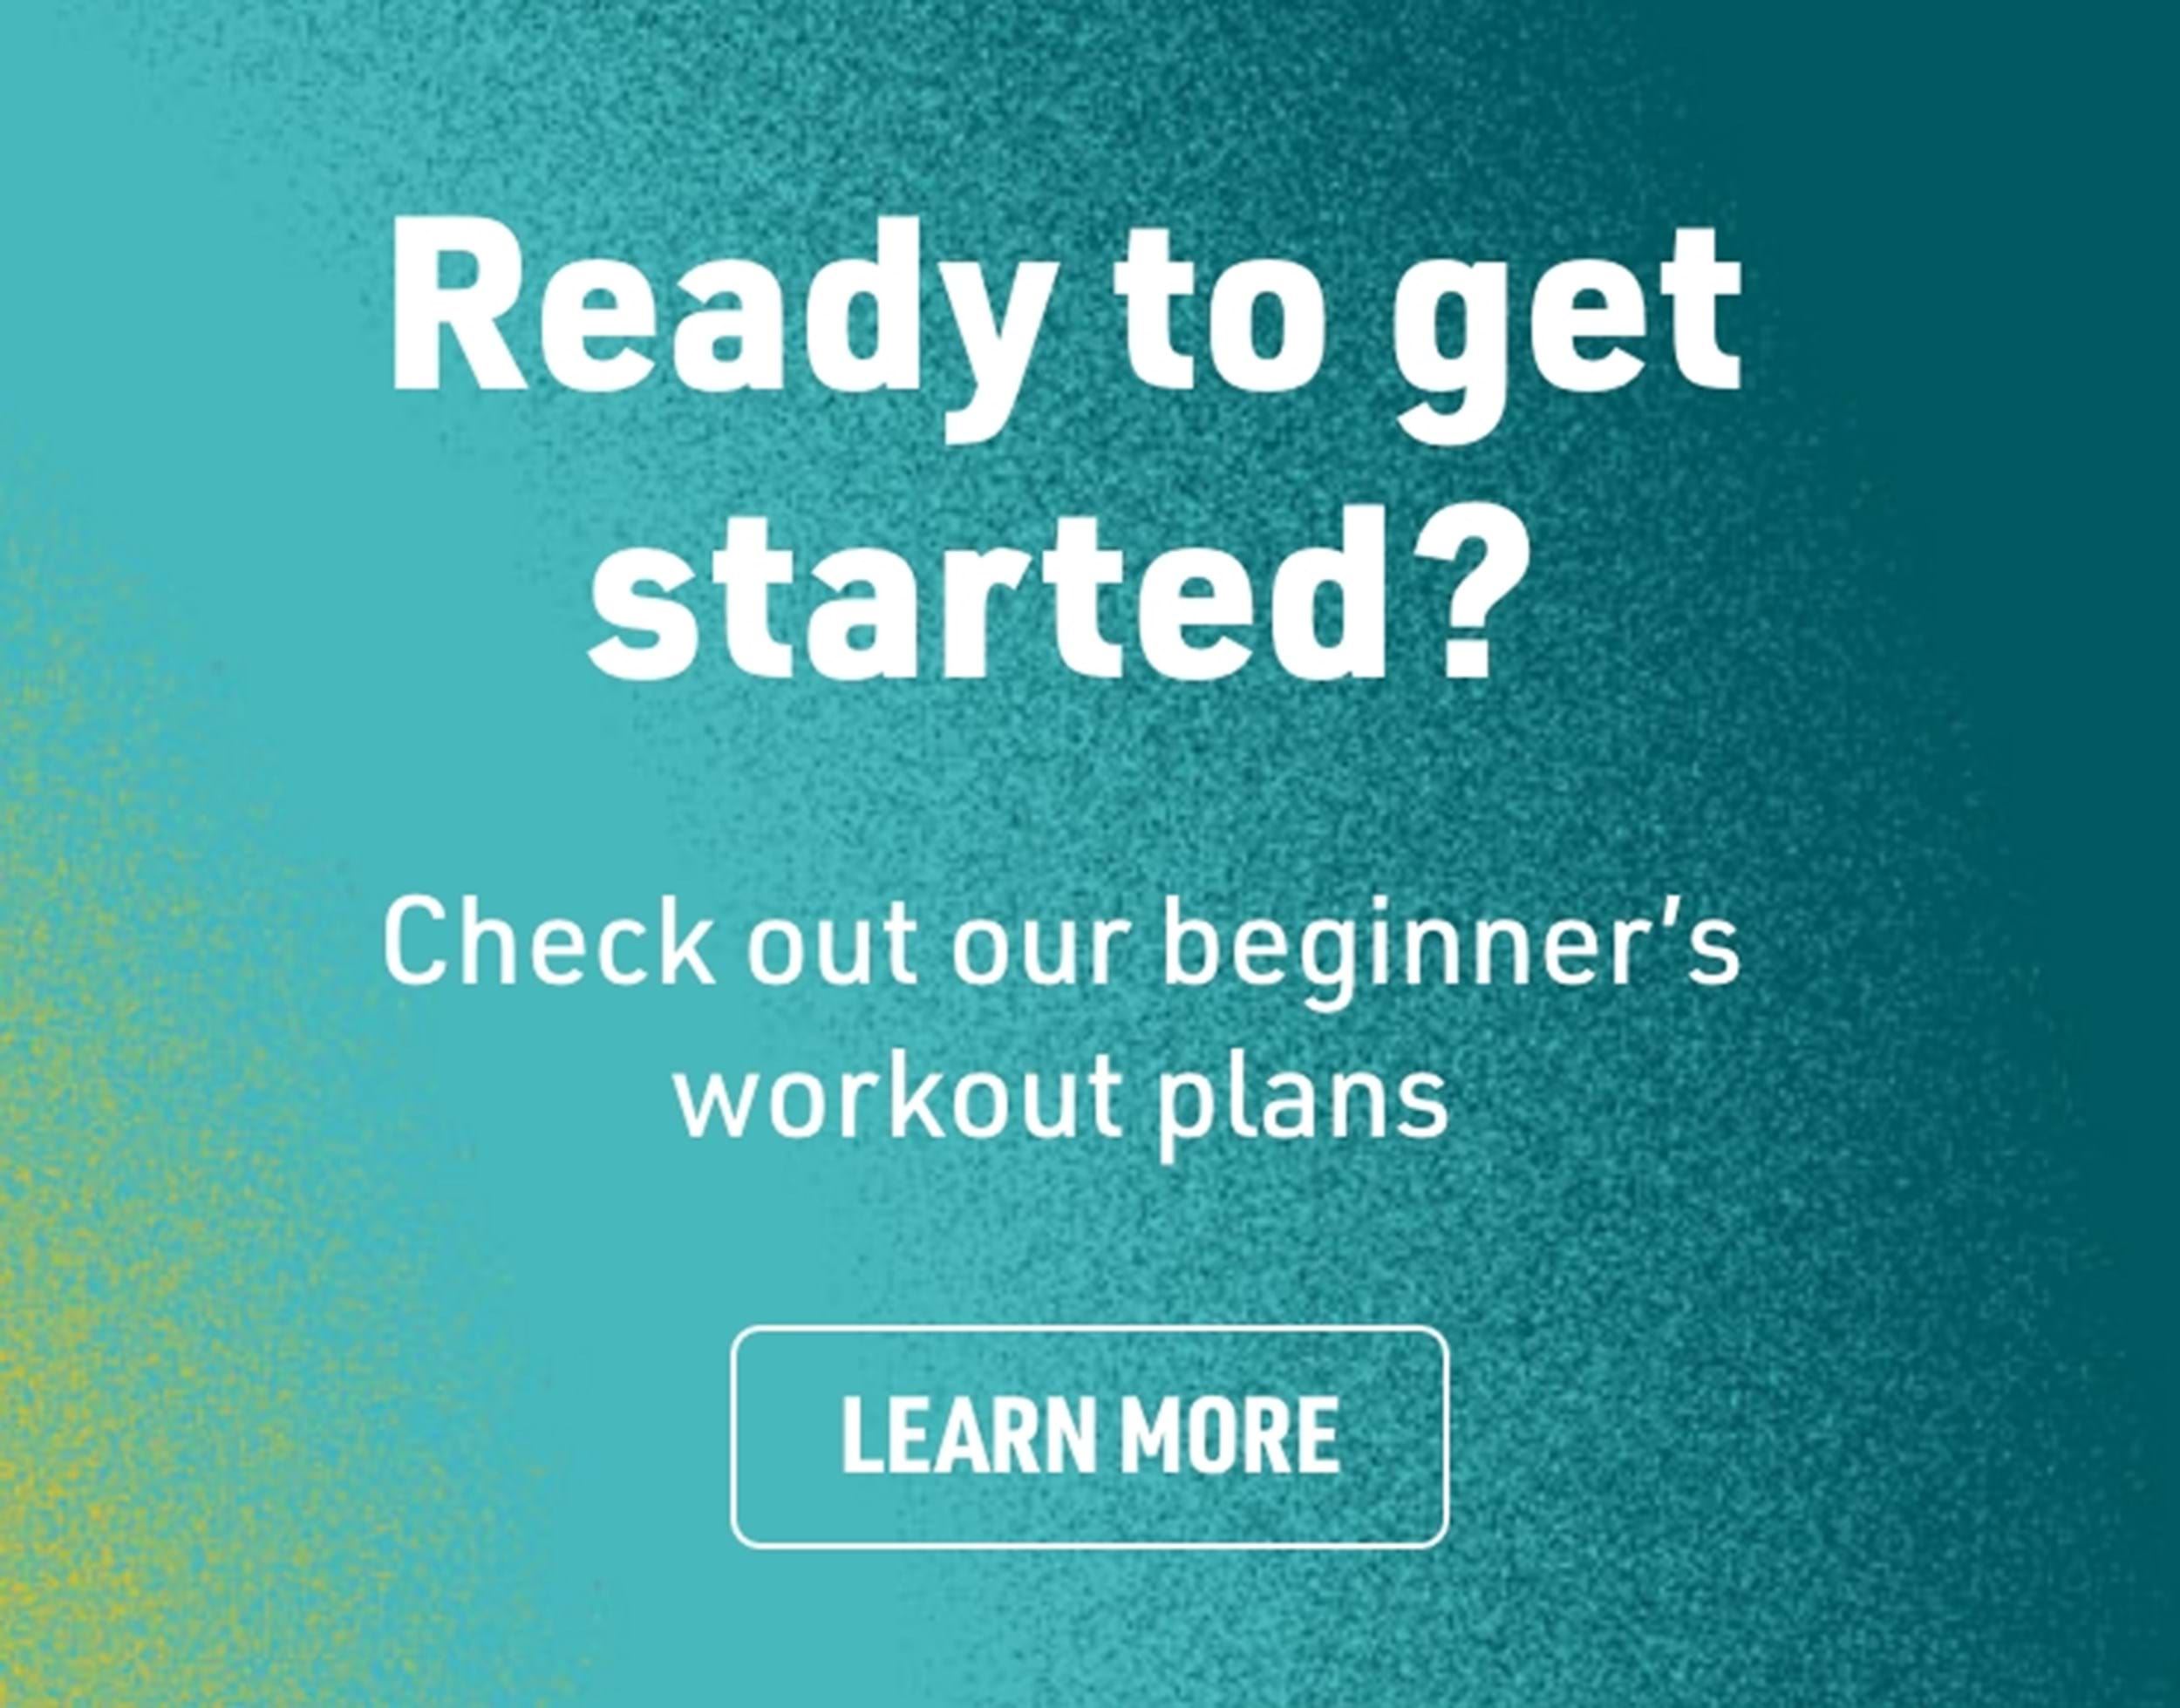 Check out the beginner's workout plans